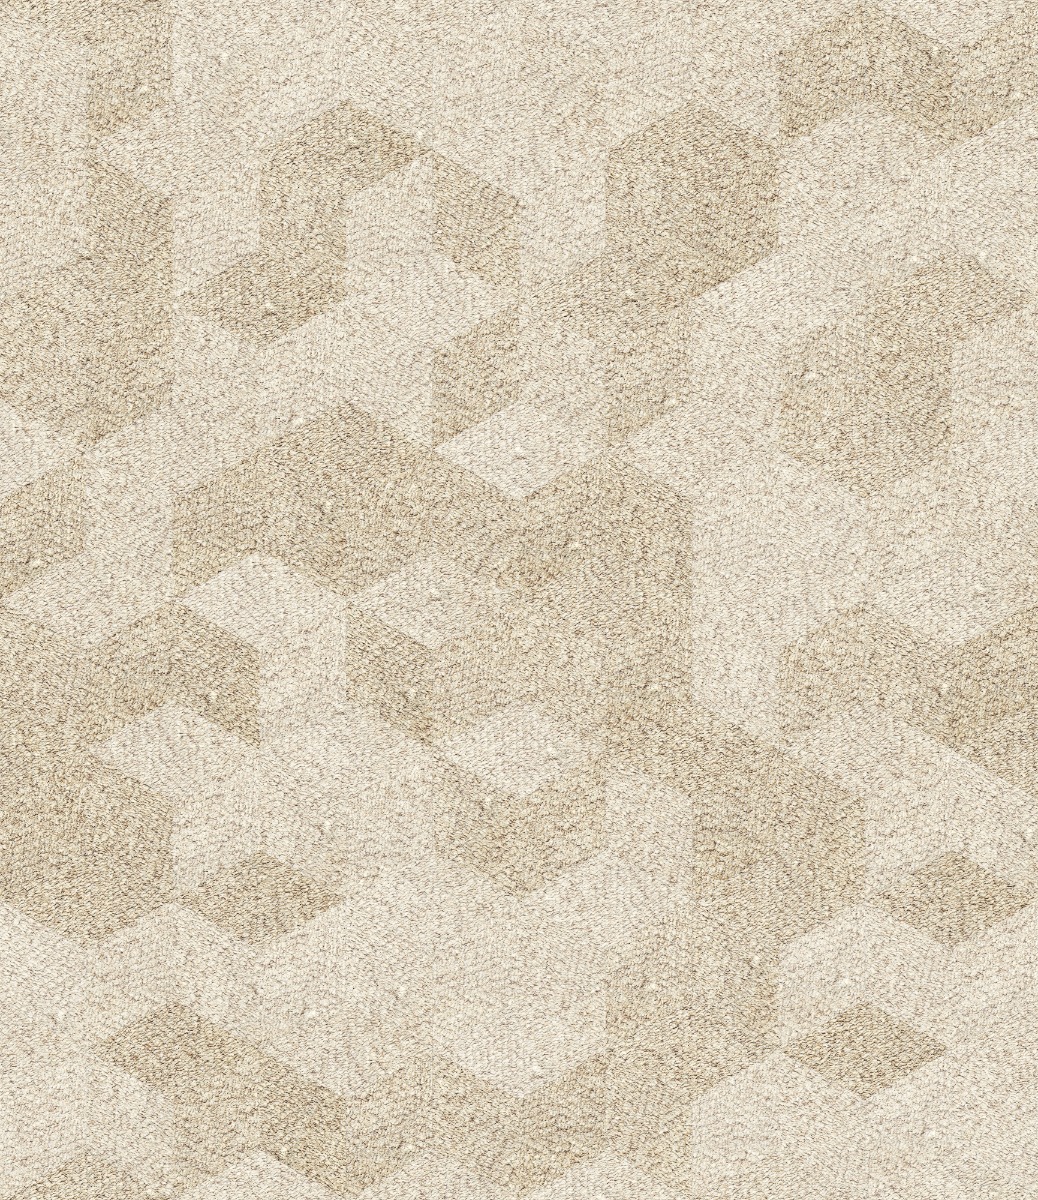 A seamless carpet texture with oatmeal loop pile carpet units arranged in a Cubic pattern